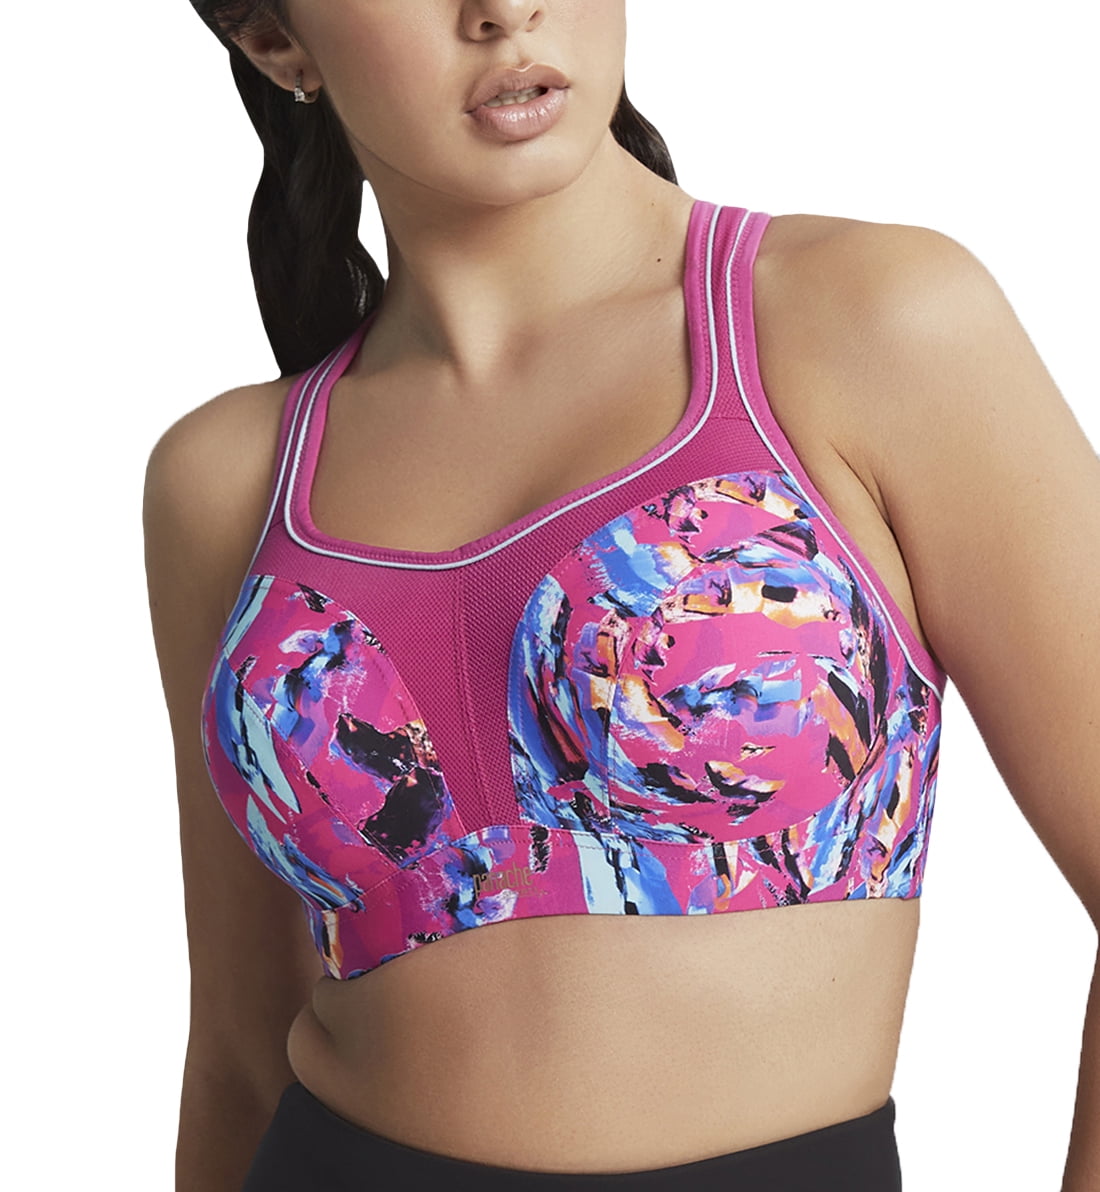 Panache Underwire Sports Bra (5021),36G,Abstract Orchid